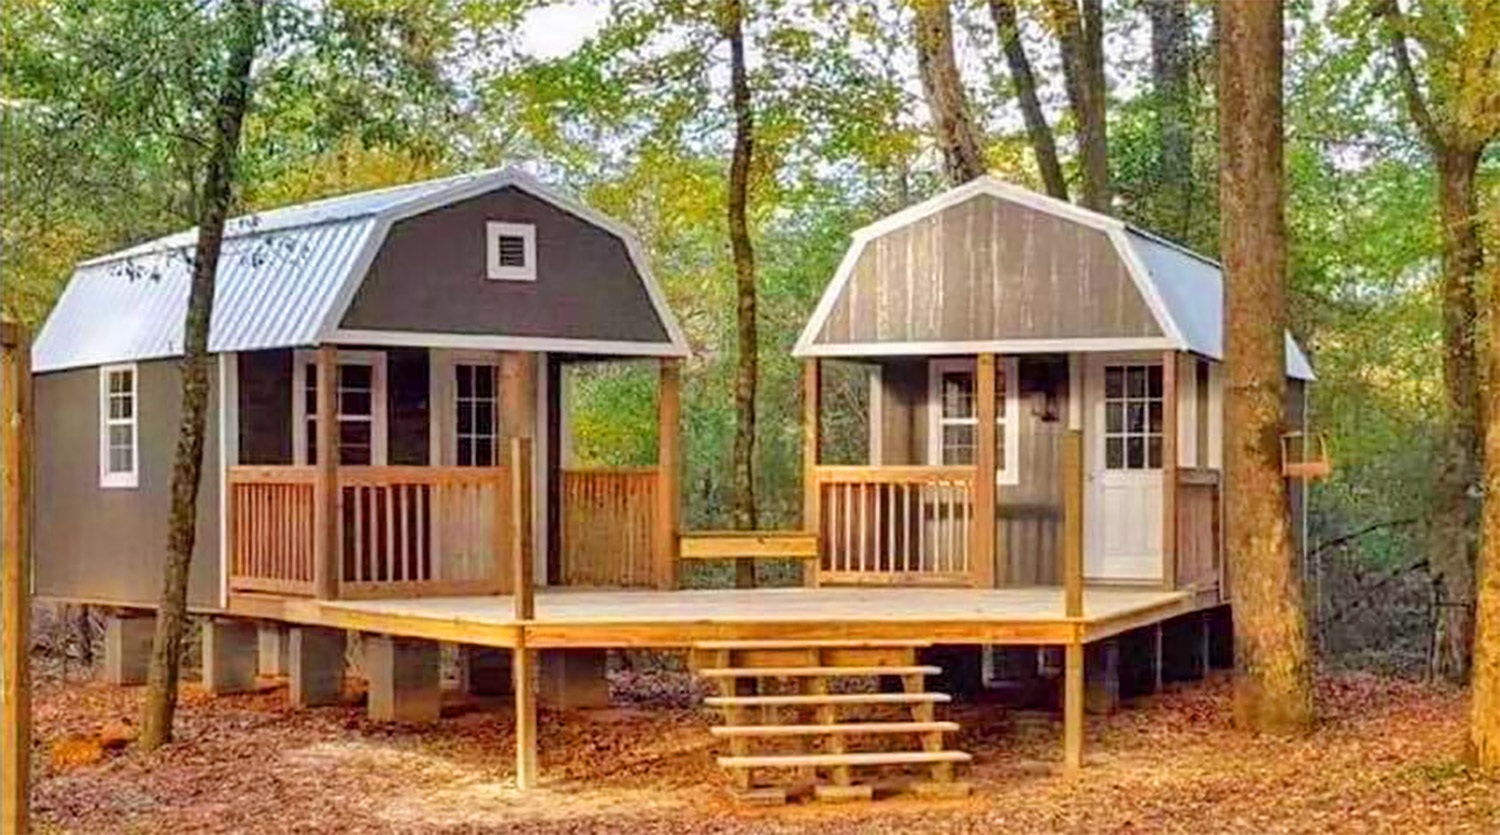 We-shed - dual tiny home he-shed and she-shed with conjoined deck